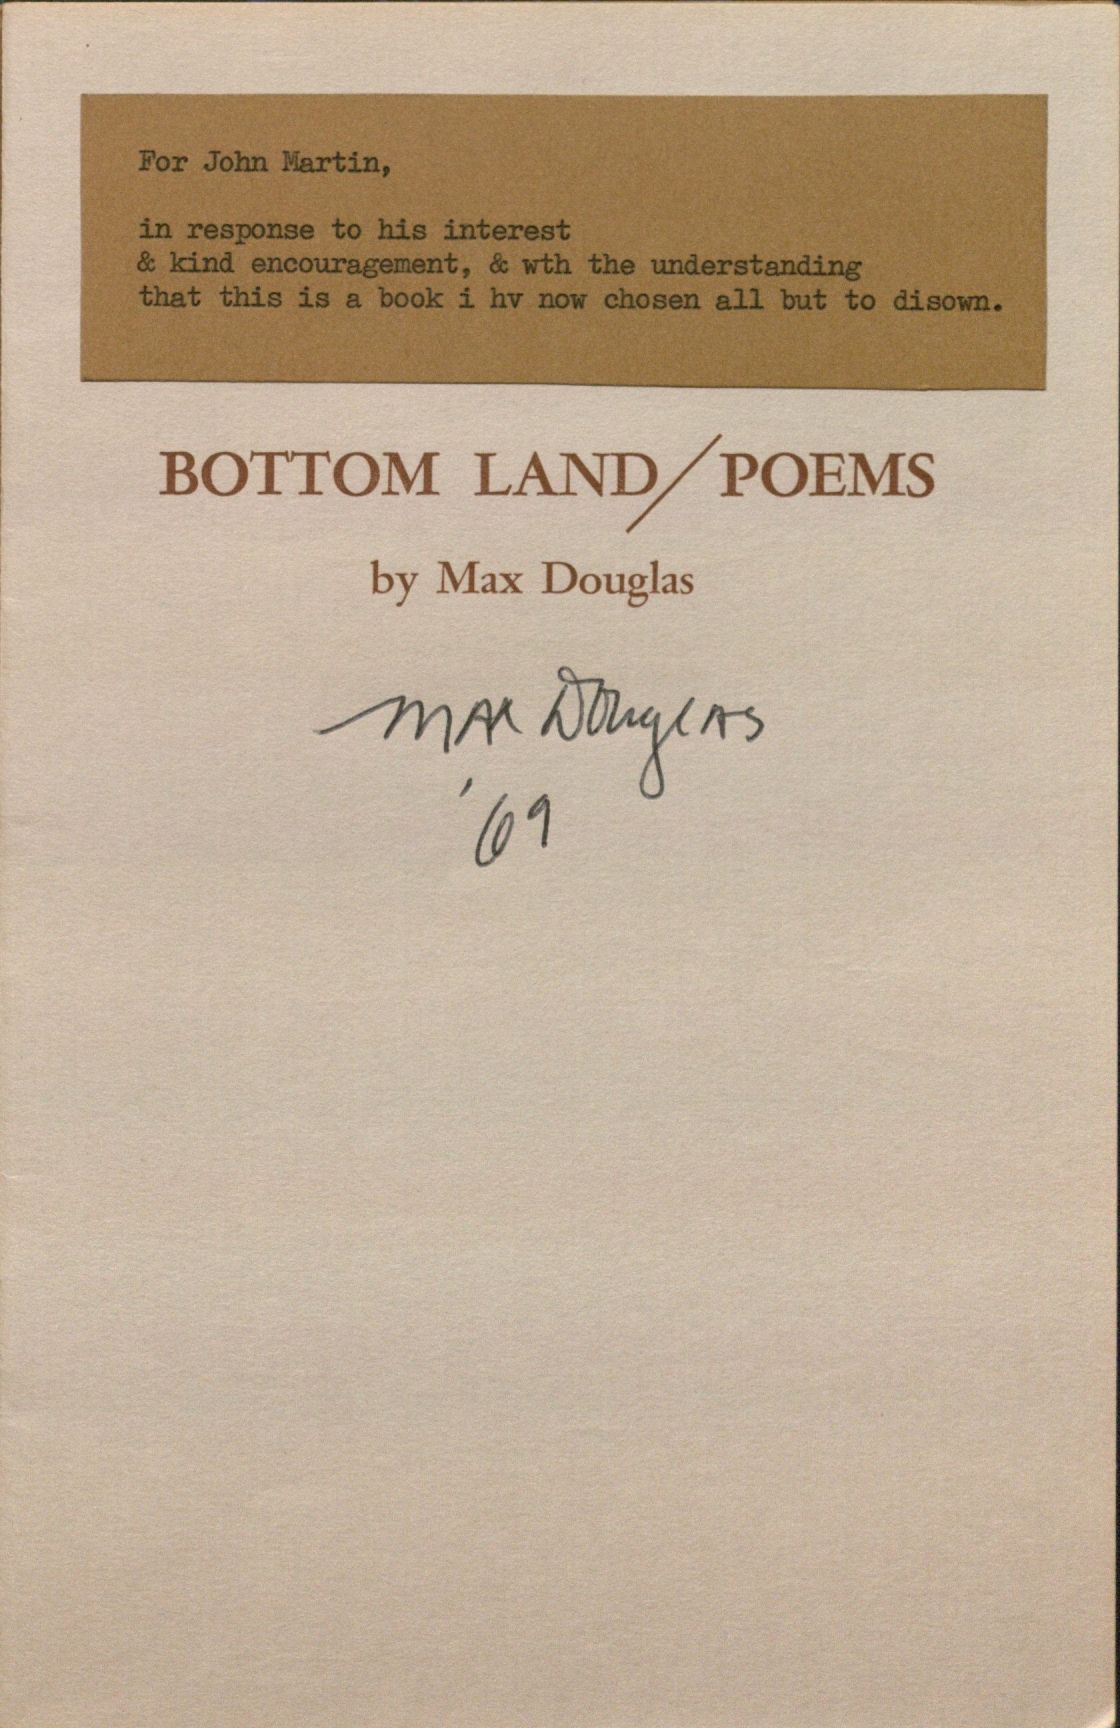 Image of typed inscription to John Martin, with Max Douglas's signature, dated '69